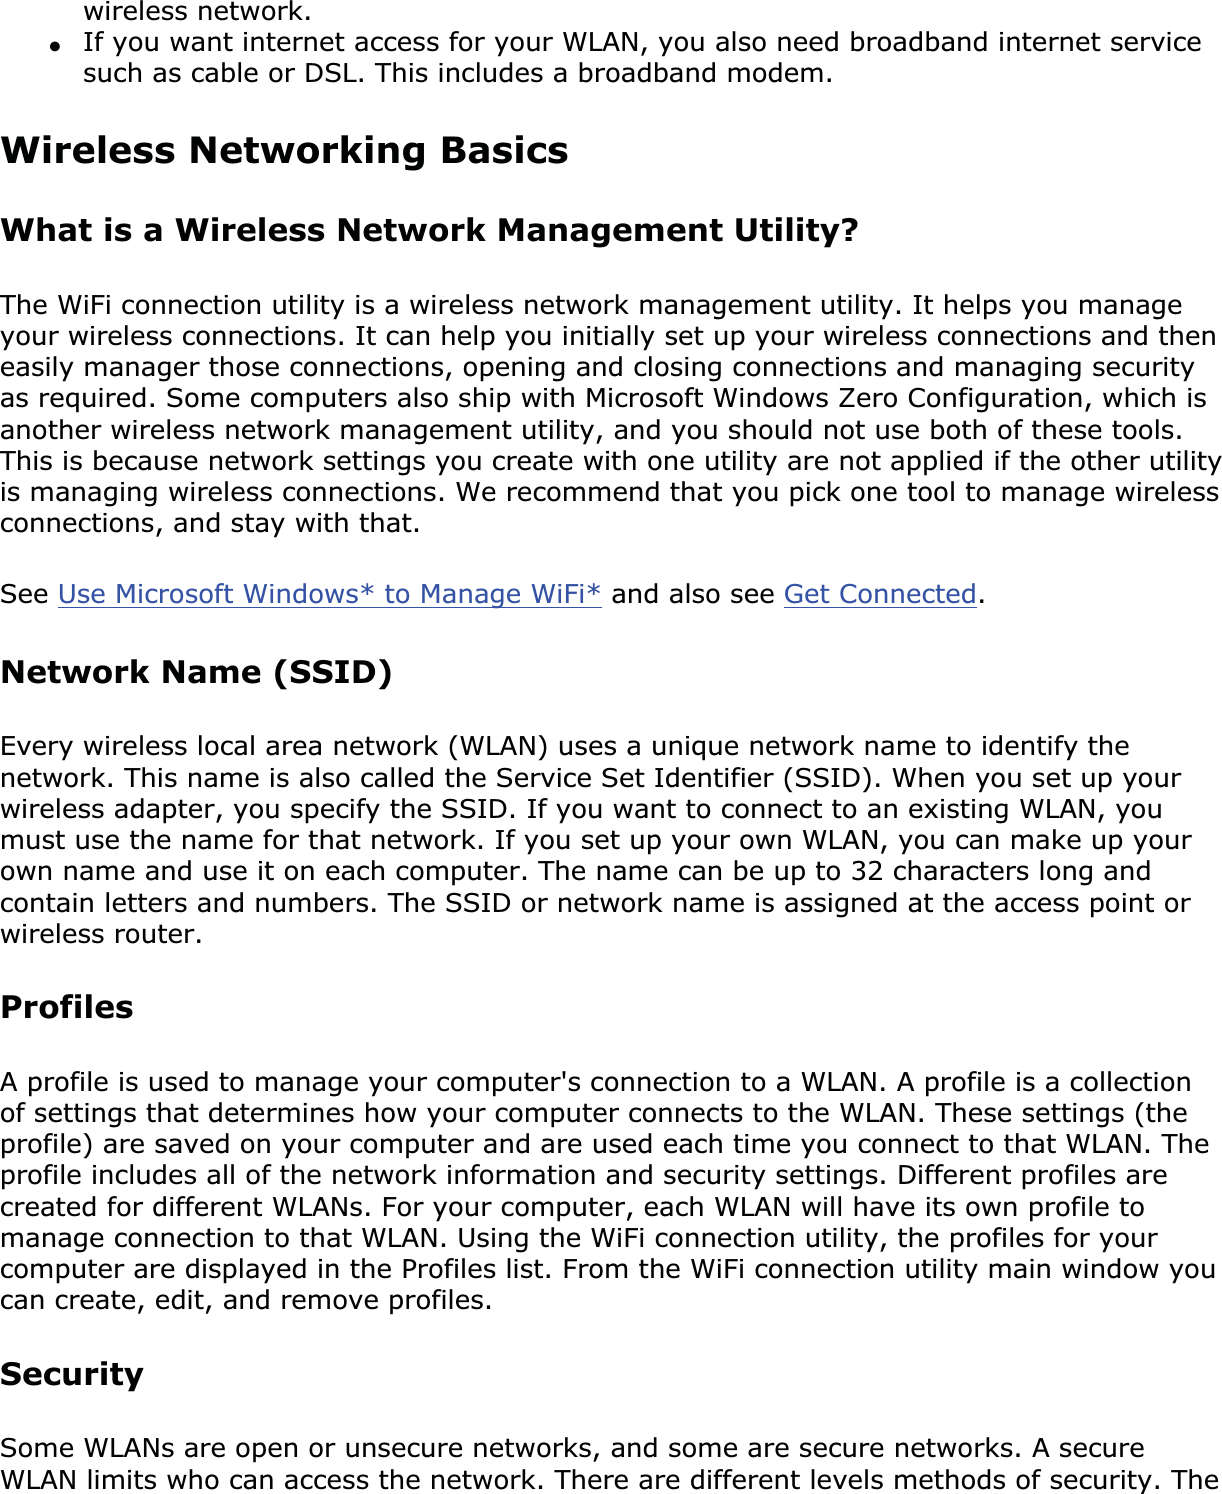 wireless network.●If you want internet access for your WLAN, you also need broadband internet service such as cable or DSL. This includes a broadband modem.Wireless Networking Basics What is a Wireless Network Management Utility?The WiFi connection utility is a wireless network management utility. It helps you manage your wireless connections. It can help you initially set up your wireless connections and then easily manager those connections, opening and closing connections and managing security as required. Some computers also ship with Microsoft Windows Zero Configuration, which is another wireless network management utility, and you should not use both of these tools. This is because network settings you create with one utility are not applied if the other utility is managing wireless connections. We recommend that you pick one tool to manage wireless connections, and stay with that. See Use Microsoft Windows* to Manage WiFi* and also see Get Connected.Network Name (SSID) Every wireless local area network (WLAN) uses a unique network name to identify the network. This name is also called the Service Set Identifier (SSID). When you set up your wireless adapter, you specify the SSID. If you want to connect to an existing WLAN, you must use the name for that network. If you set up your own WLAN, you can make up your own name and use it on each computer. The name can be up to 32 characters long and contain letters and numbers. The SSID or network name is assigned at the access point or wireless router. ProfilesA profile is used to manage your computer&apos;s connection to a WLAN. A profile is a collection of settings that determines how your computer connects to the WLAN. These settings (the profile) are saved on your computer and are used each time you connect to that WLAN. The profile includes all of the network information and security settings. Different profiles are created for different WLANs. For your computer, each WLAN will have its own profile to manage connection to that WLAN. Using the WiFi connection utility, the profiles for your computer are displayed in the Profiles list. From the WiFi connection utility main window you can create, edit, and remove profiles.SecuritySome WLANs are open or unsecure networks, and some are secure networks. A secure WLAN limits who can access the network. There are different levels methods of security. The 